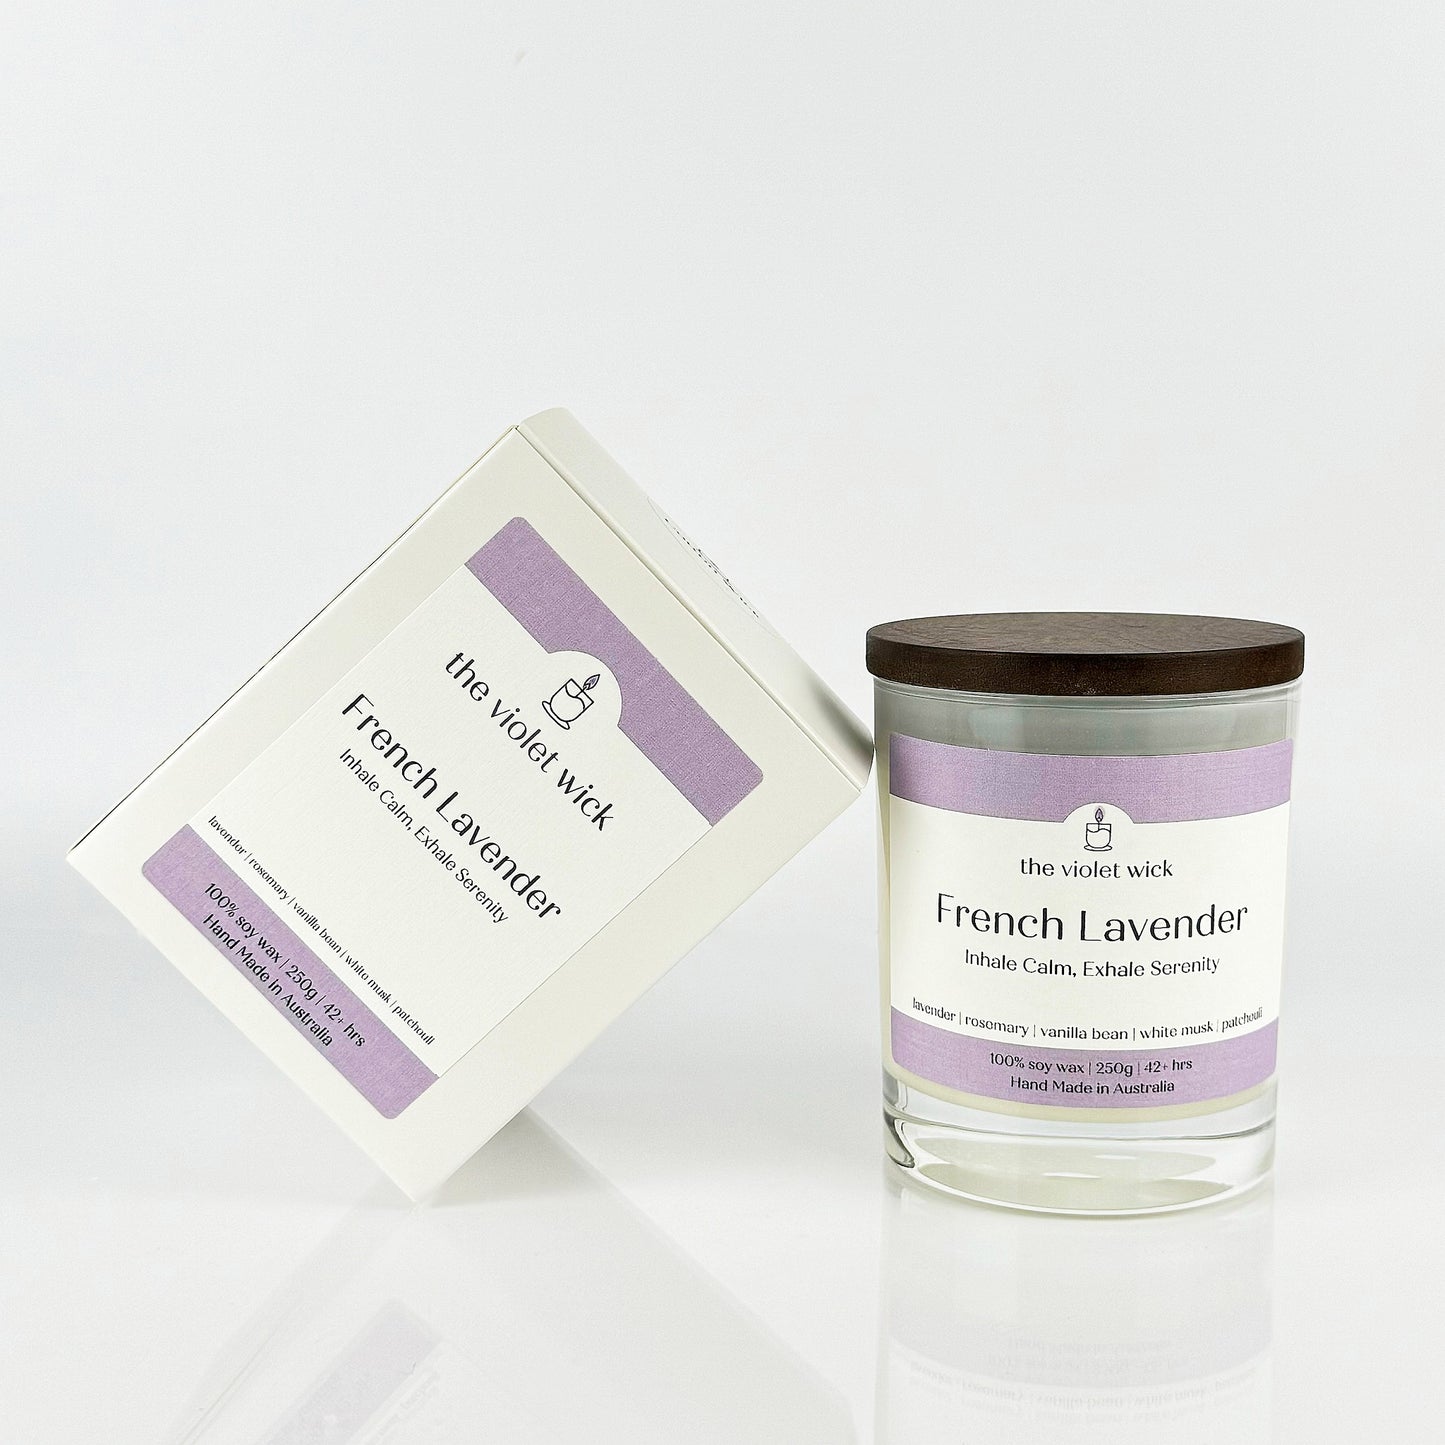 French Lavender soy candle from The Violet Wick